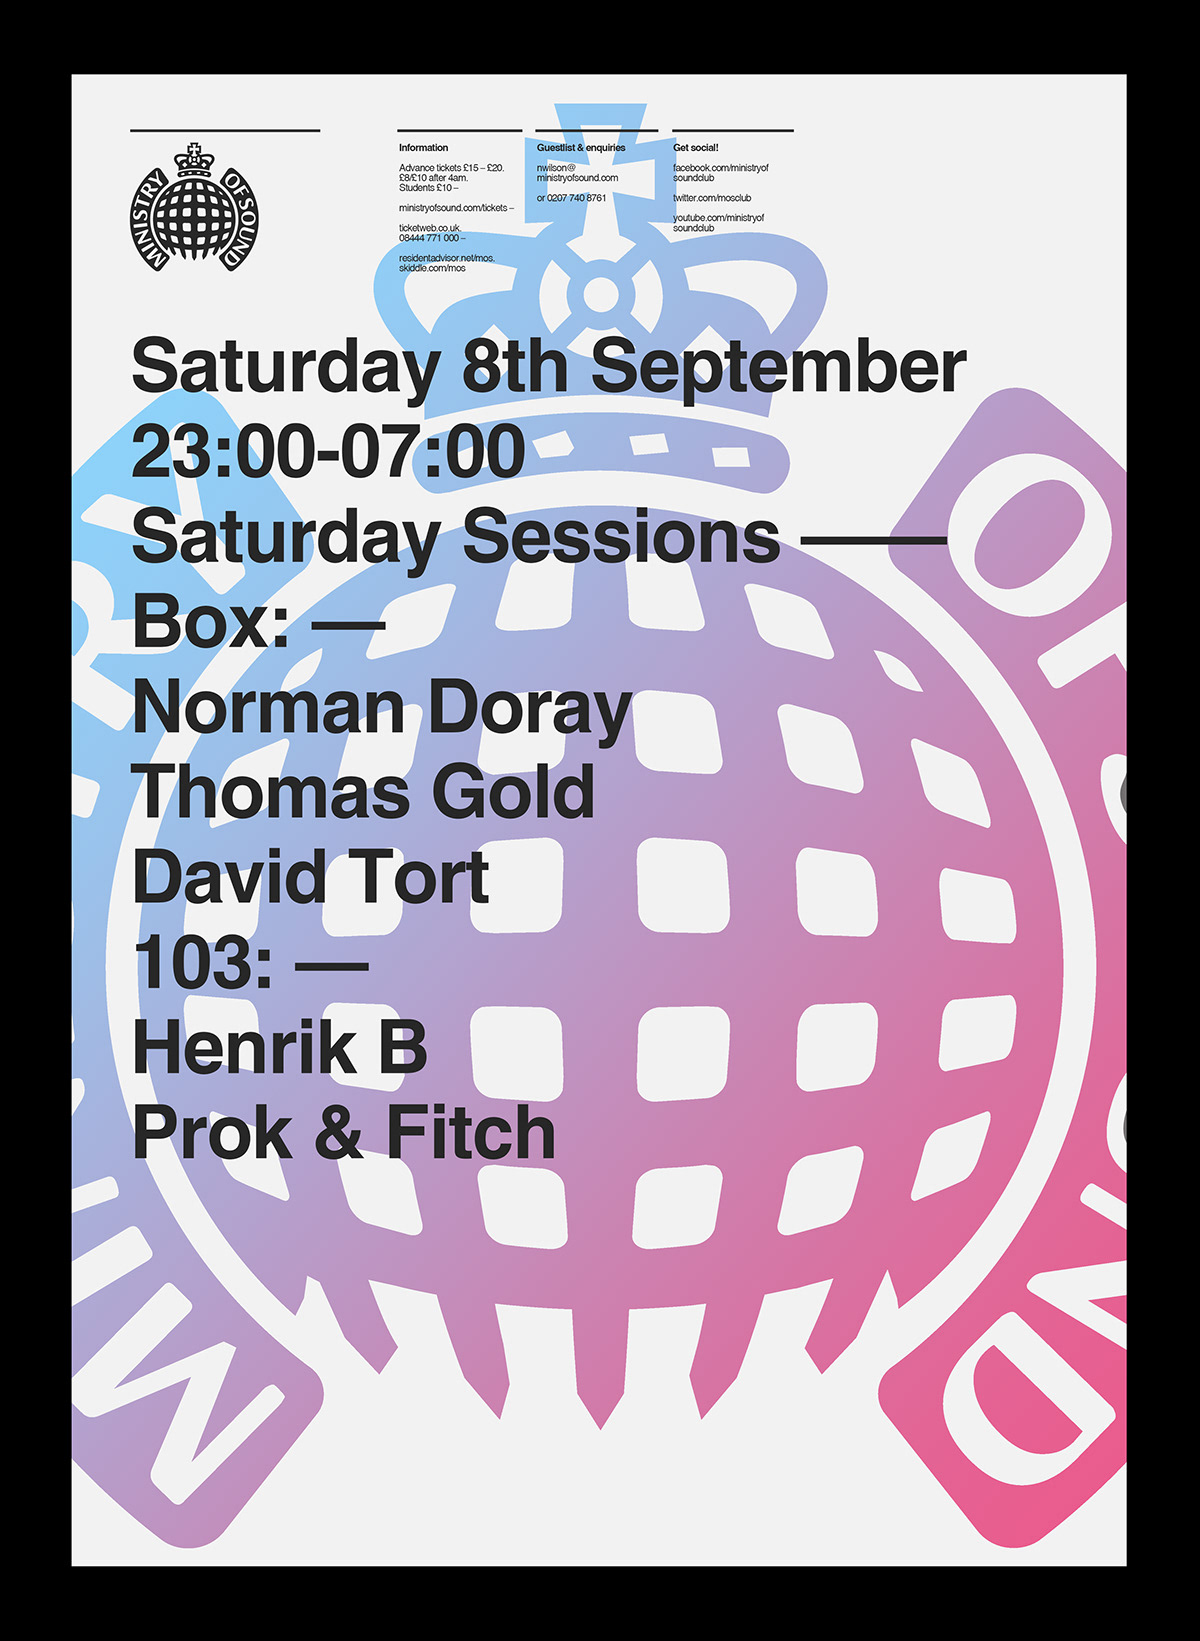 Ministry of Sound Saturday Sessions